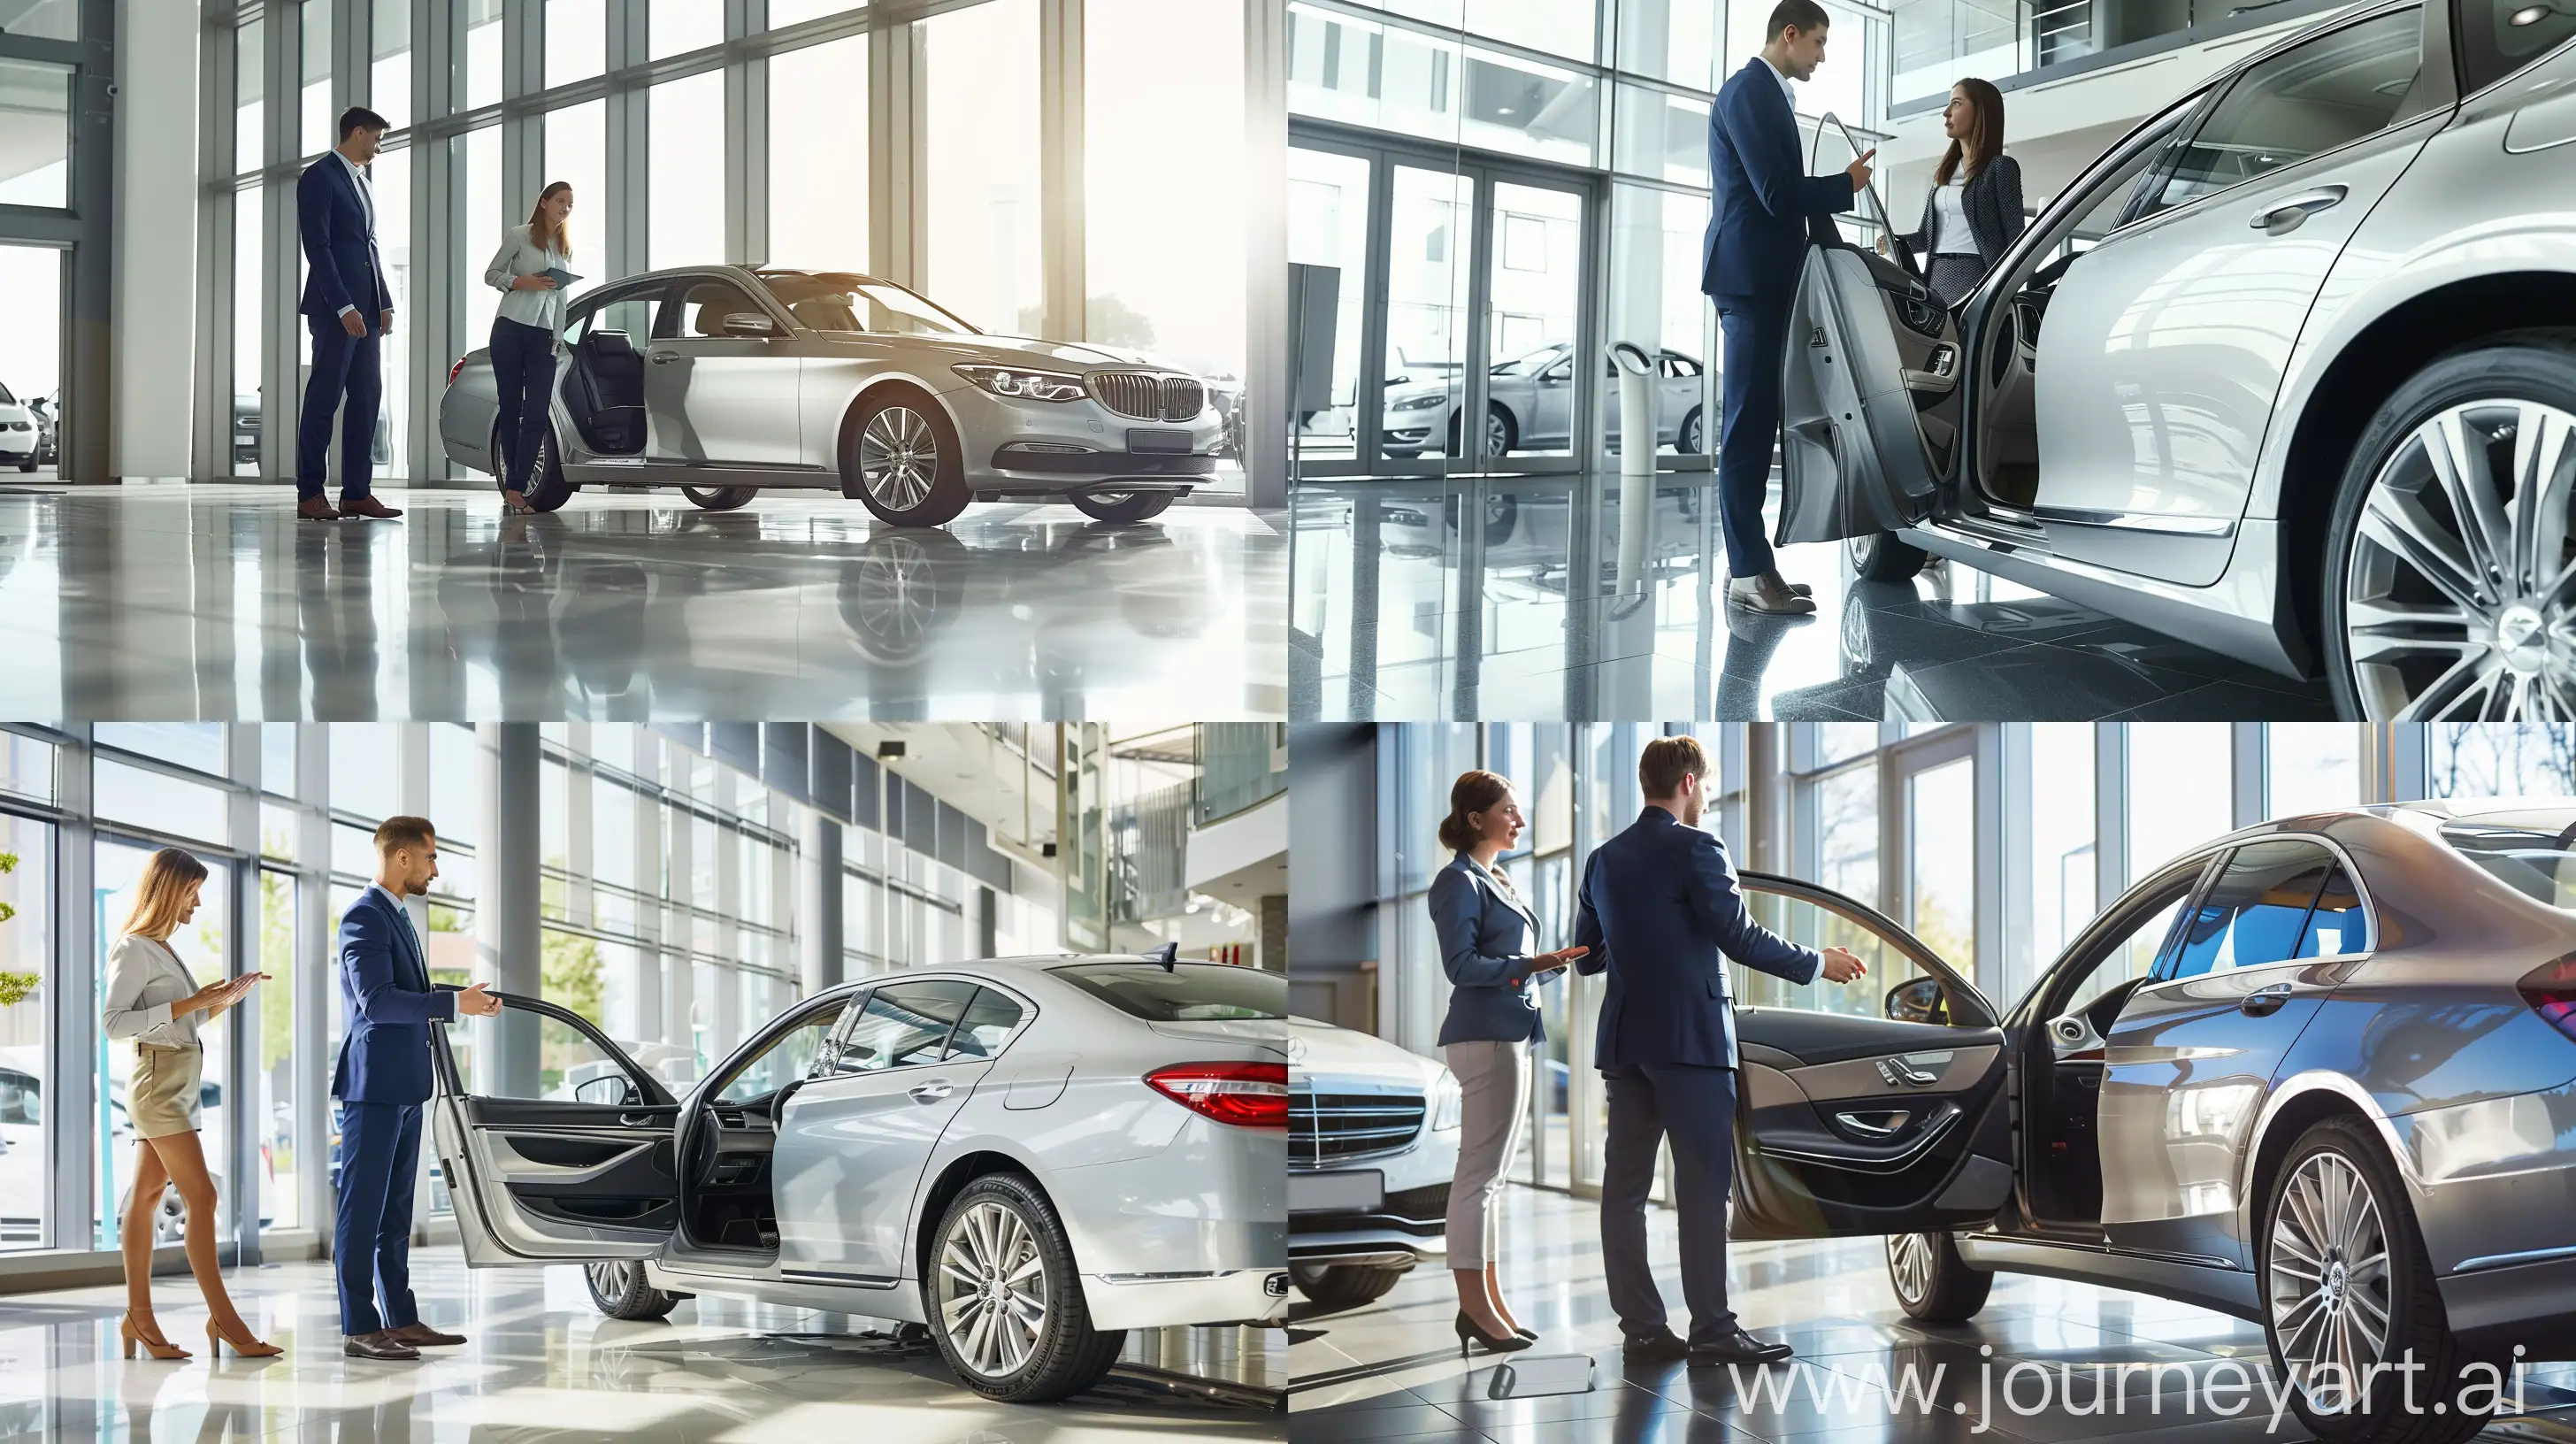 Professional photo of a modern car dealership interior. A male salesman, wearing a tailored dark blue suit, is showing a sleek silver sedan to a female customer, dressed in business casual attire. The setting is brightly lit with natural sunlight streaming through large windows, highlighting the polished chrome details of the cars and the clean, minimalist design of the showroom. The composition is from a low angle, capturing the interaction between the customer and salesman as they discuss features beside the open car door. --v 6.0 --style raw --ar 16:9